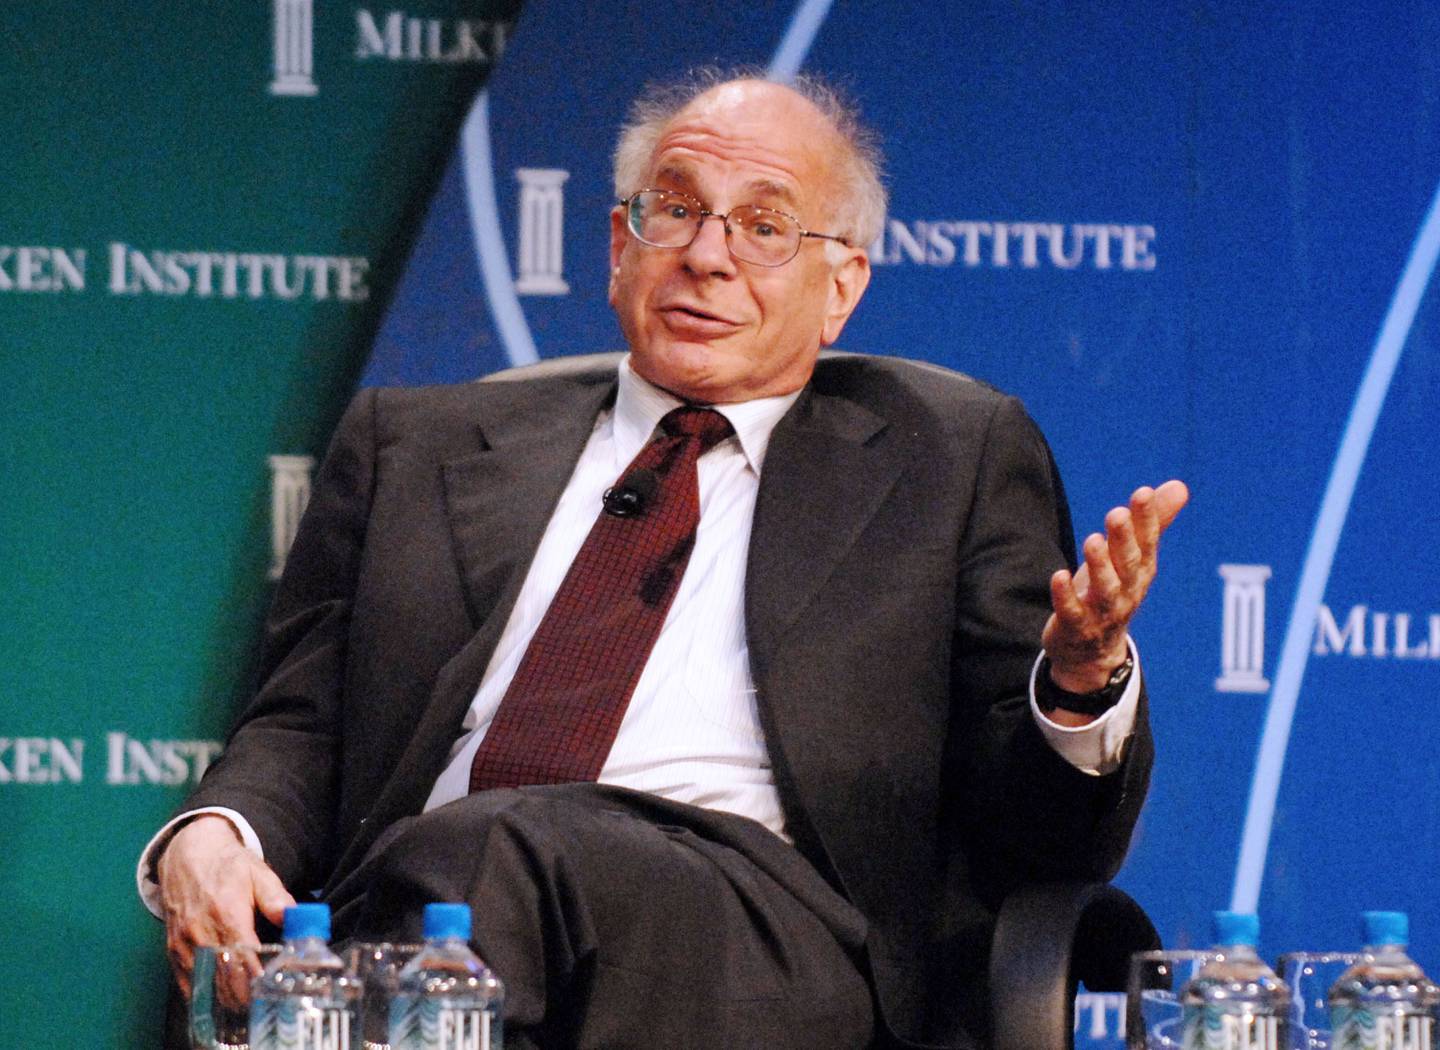 Daniel Kahneman is considered one of the fathers of behavioral economics and won the Nobel Prize in Economics in 2002 "for integrating insights from psychology research into economic science, especially as it relates to human judgment and decision making under uncertainty."